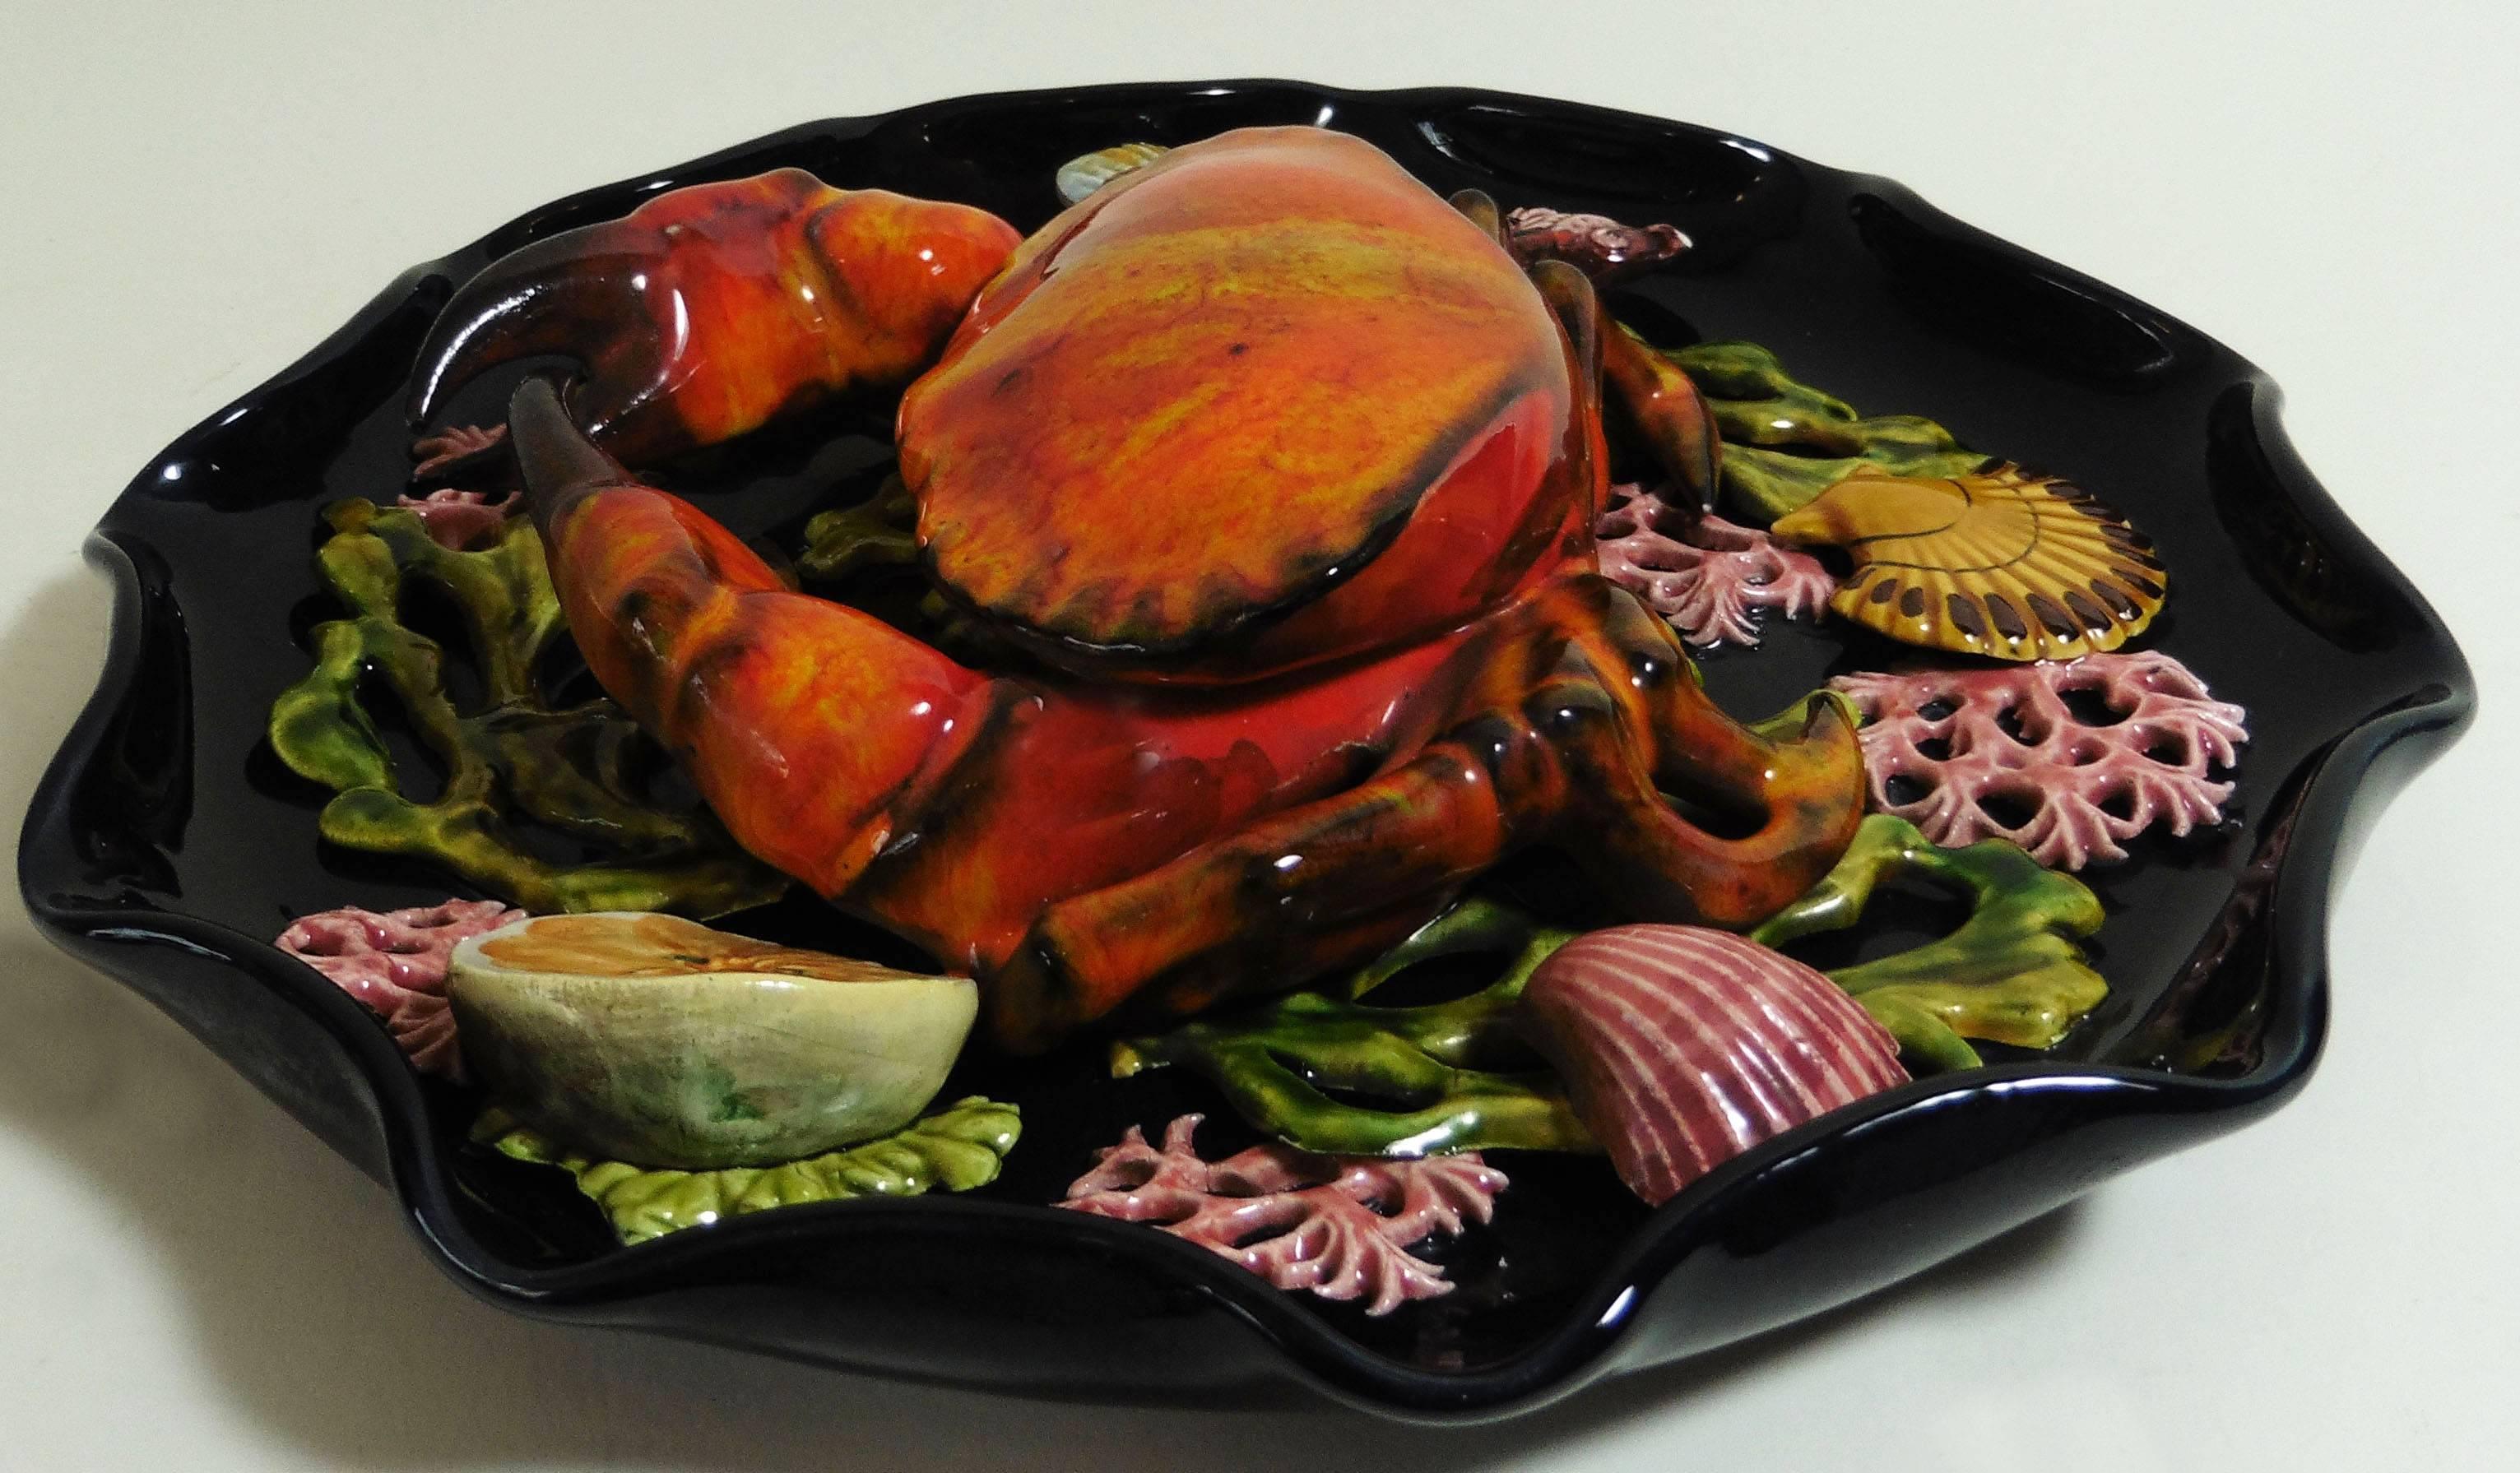 Large Majolica wall platter attributed to Vallauris, circa 1950.
A large crab in high relief on the center surrounded by seaweeds, one fish, shells and a slice of lemon.